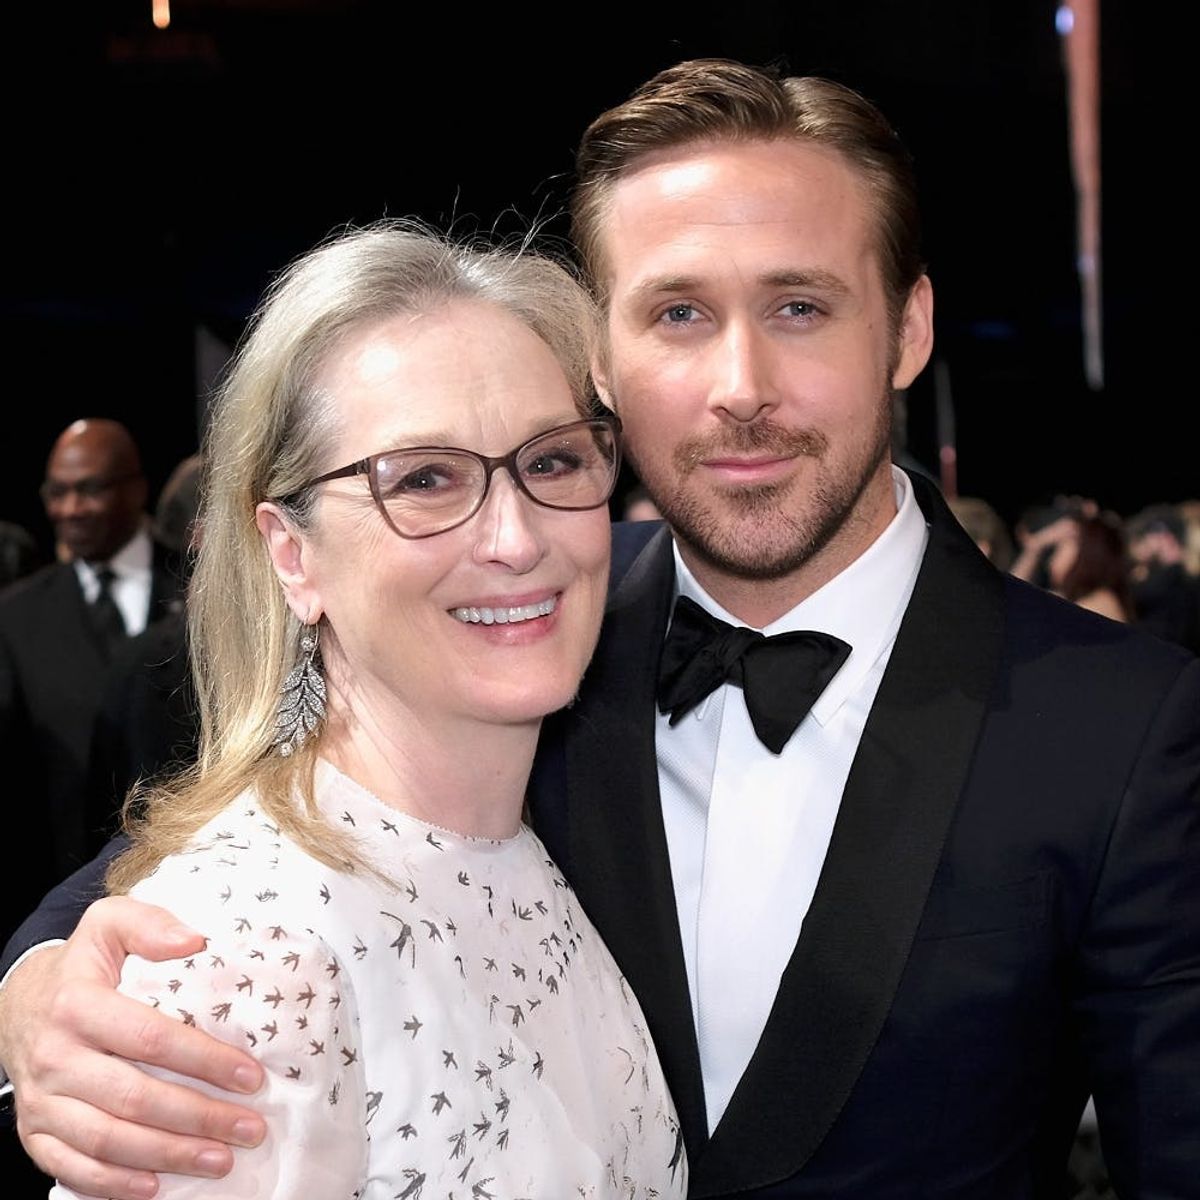 Ryan Gosling Was Totally Mom’d by Meryl Streep at the SAG Awards